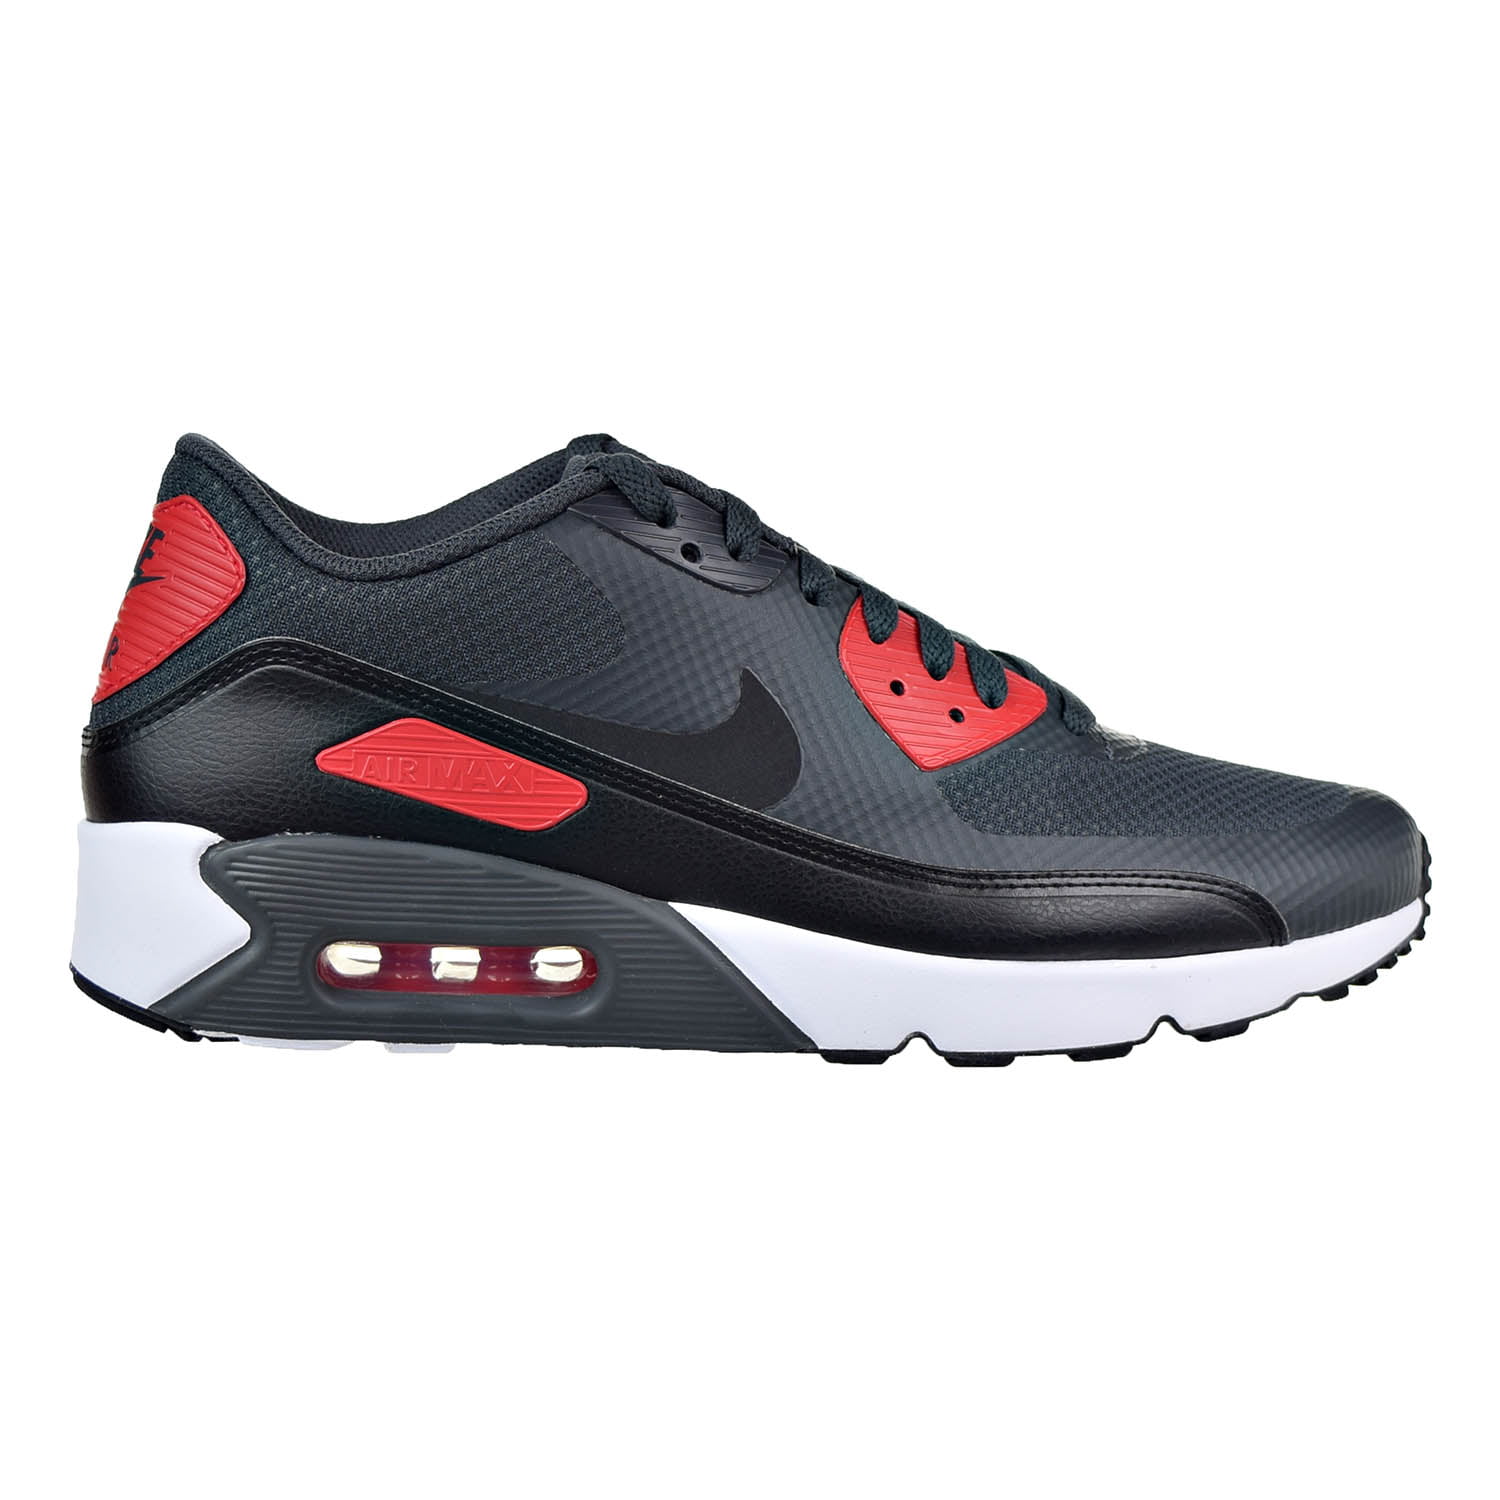 Nike Air Max 90 Ultra 2.0 Essential Men's Shoes Anthracite/Black 